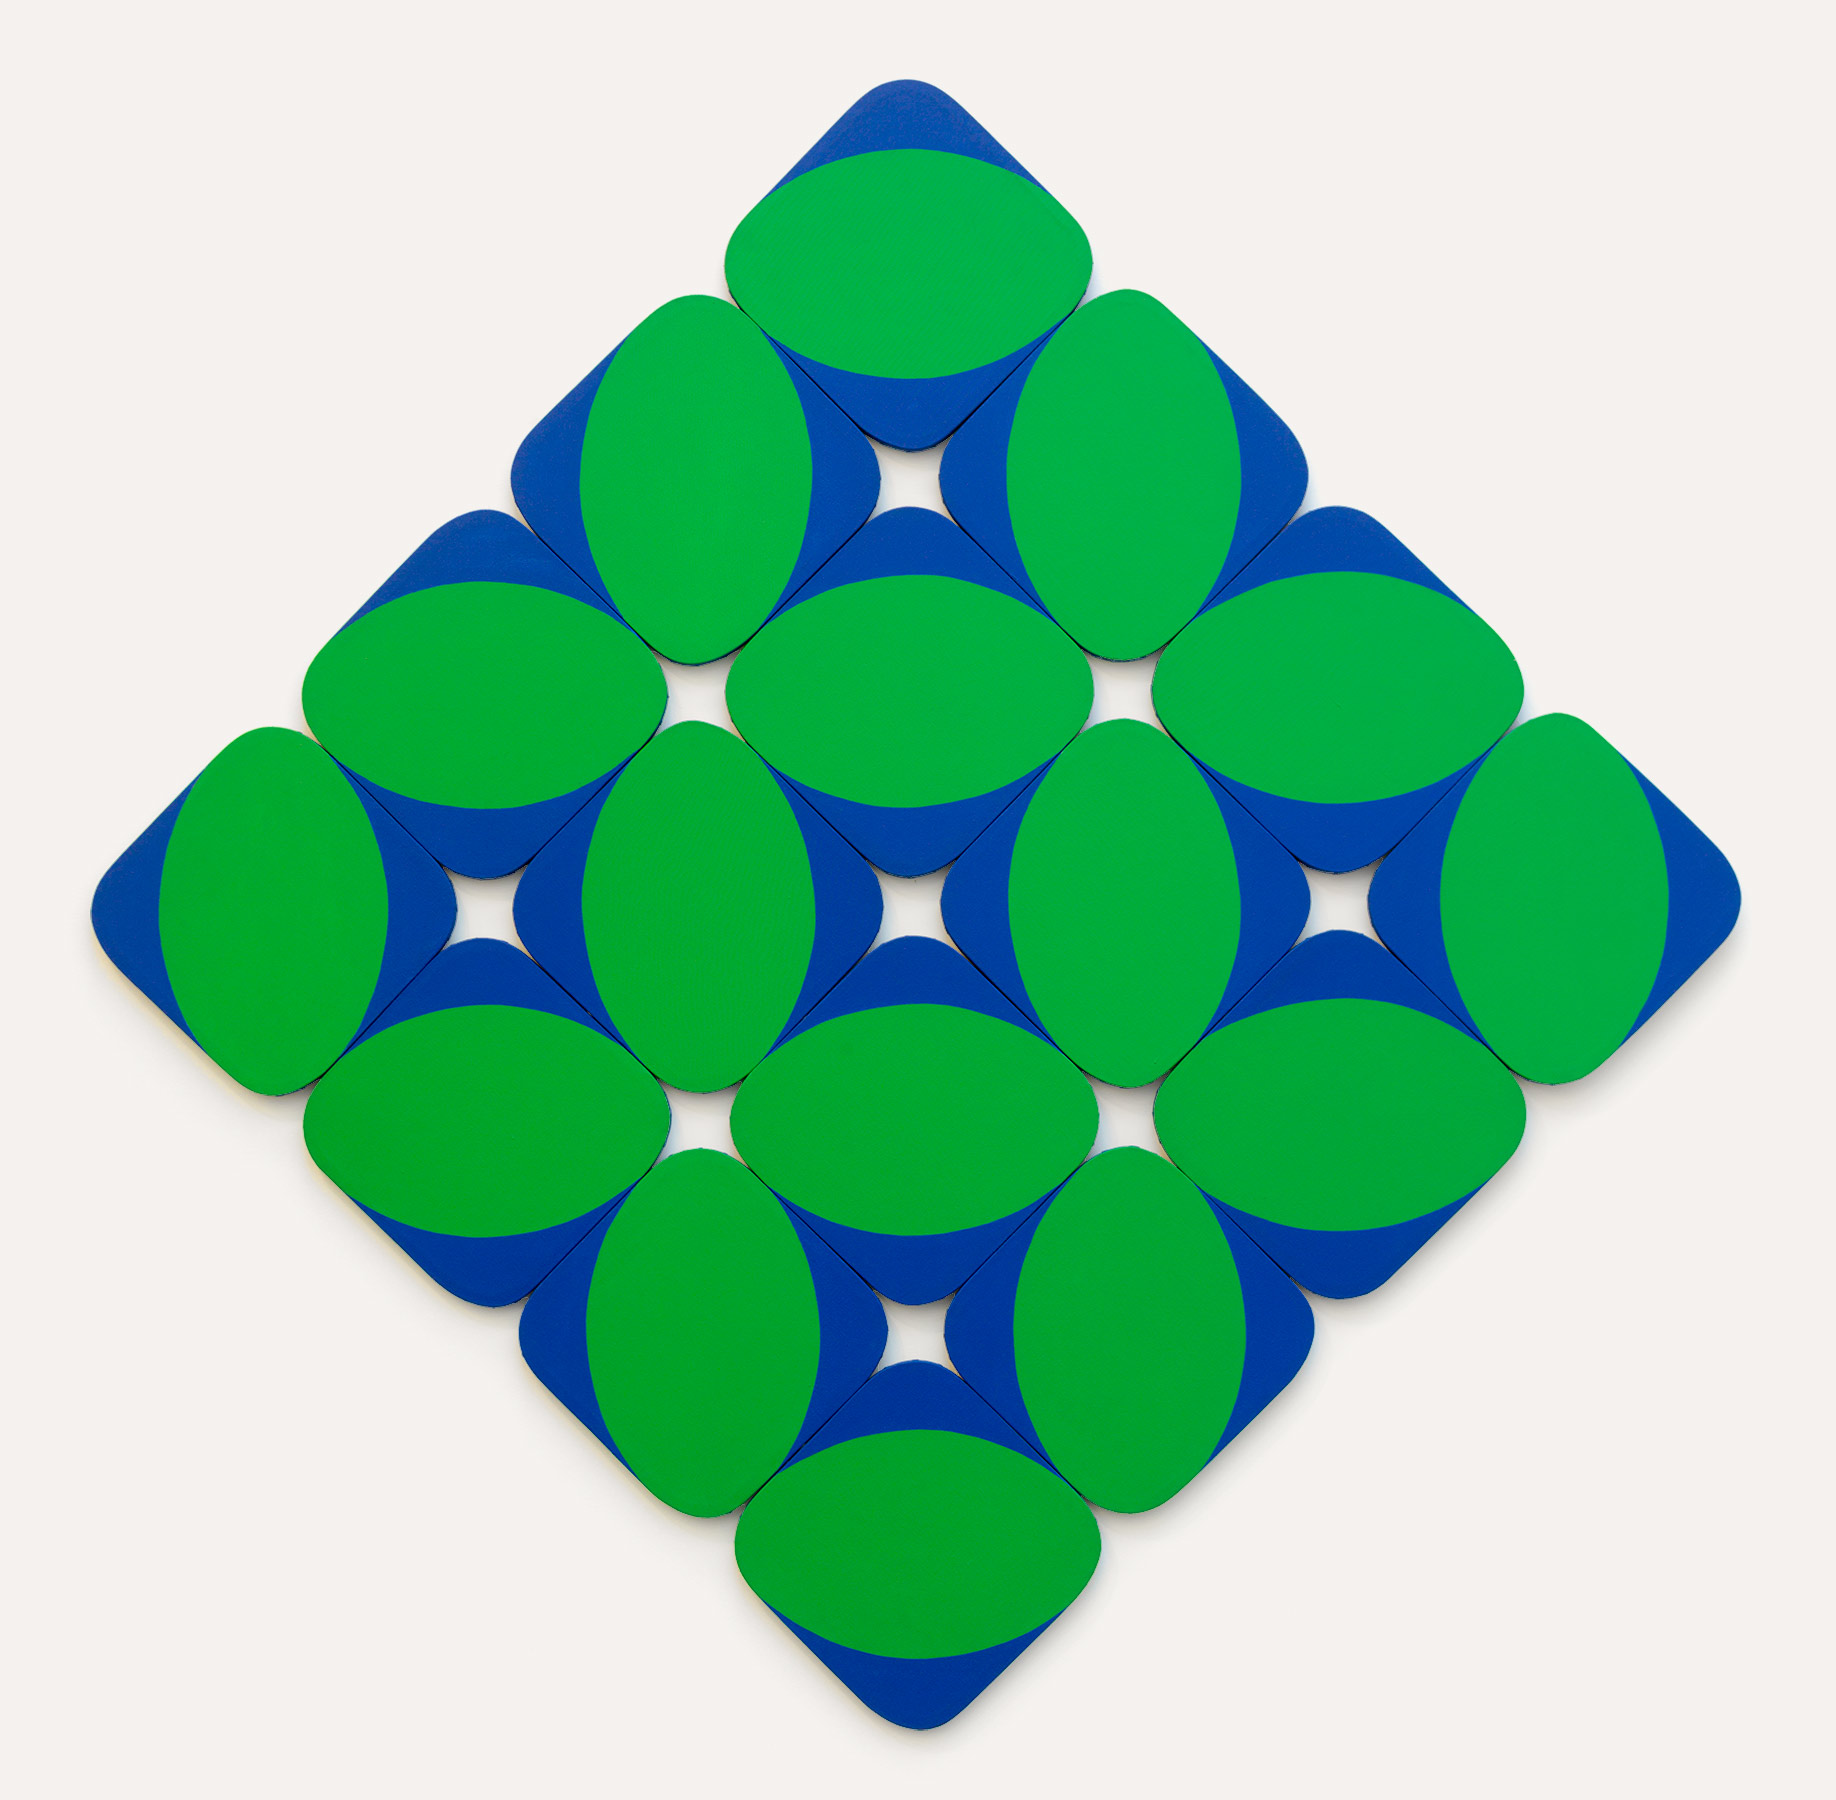 16 rounded corner diamond-shaped canvases, fit together 4x4 to make one large diamond shape for the entire piece. Each has a green pill shape either horizontal or vertical and blue cuts filling in the rest of the canvases. The alternation of position and arrangement create a complex pattern which also gains complexity from the shapes cut-out where rounded corners meet.